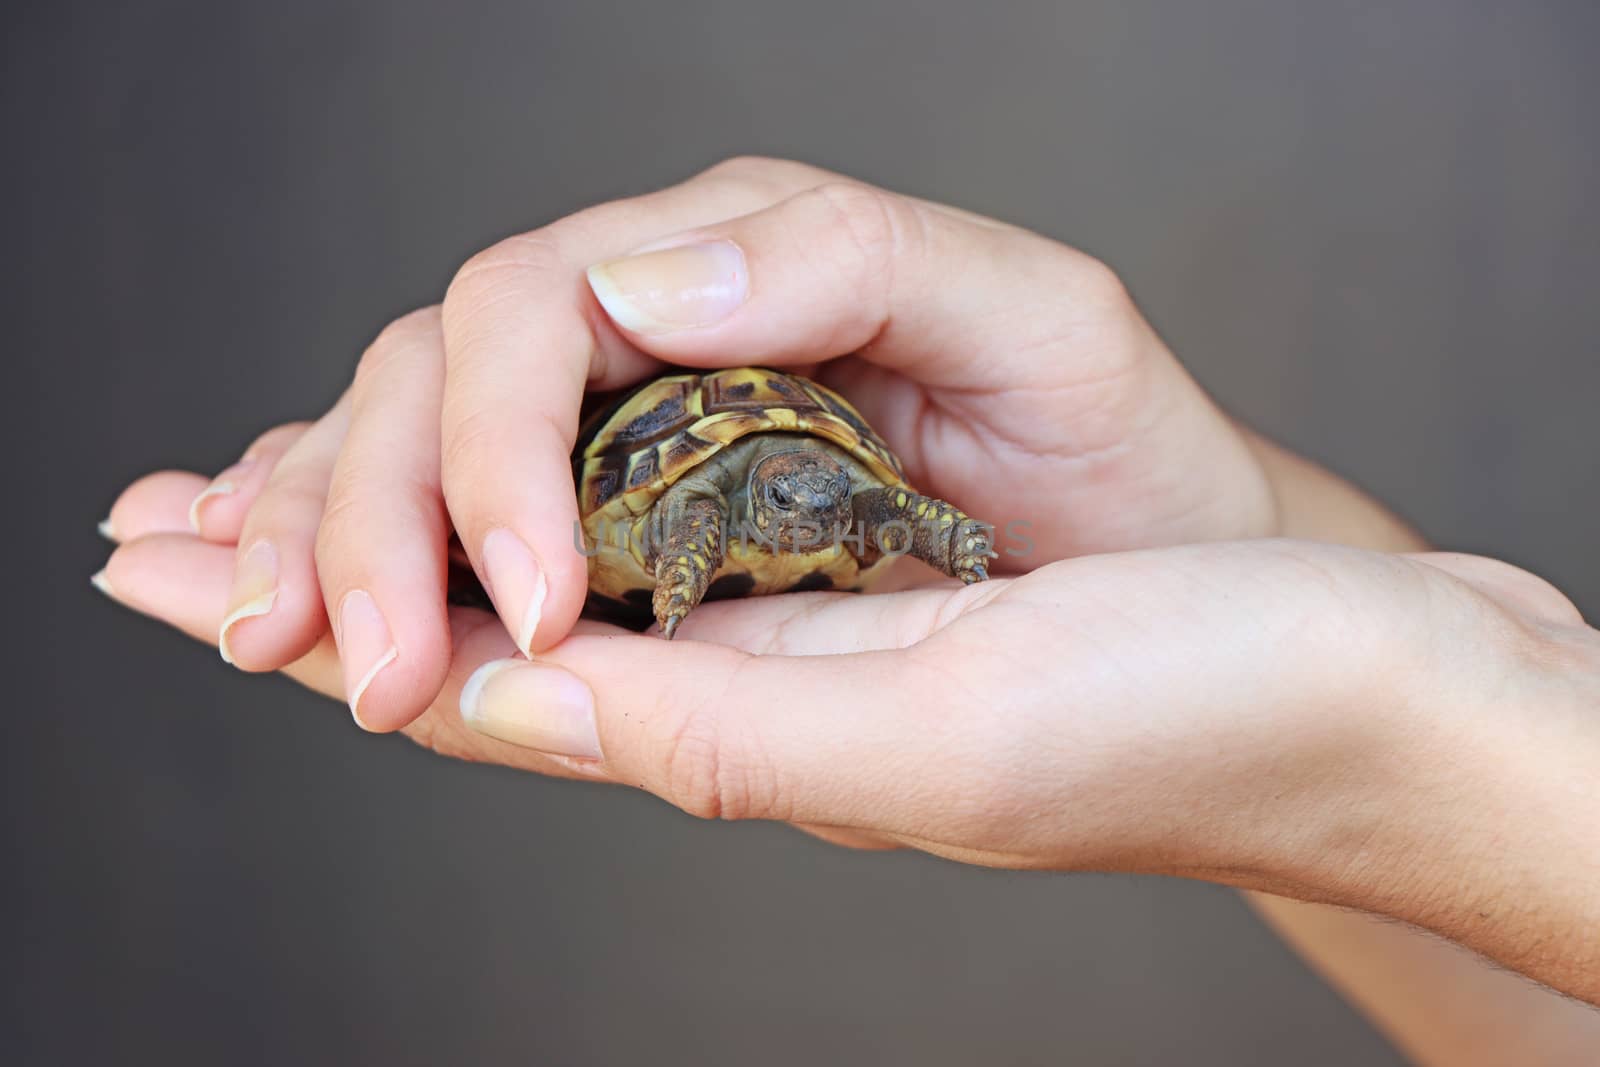 Small turtles, pet in the hands of a young girl